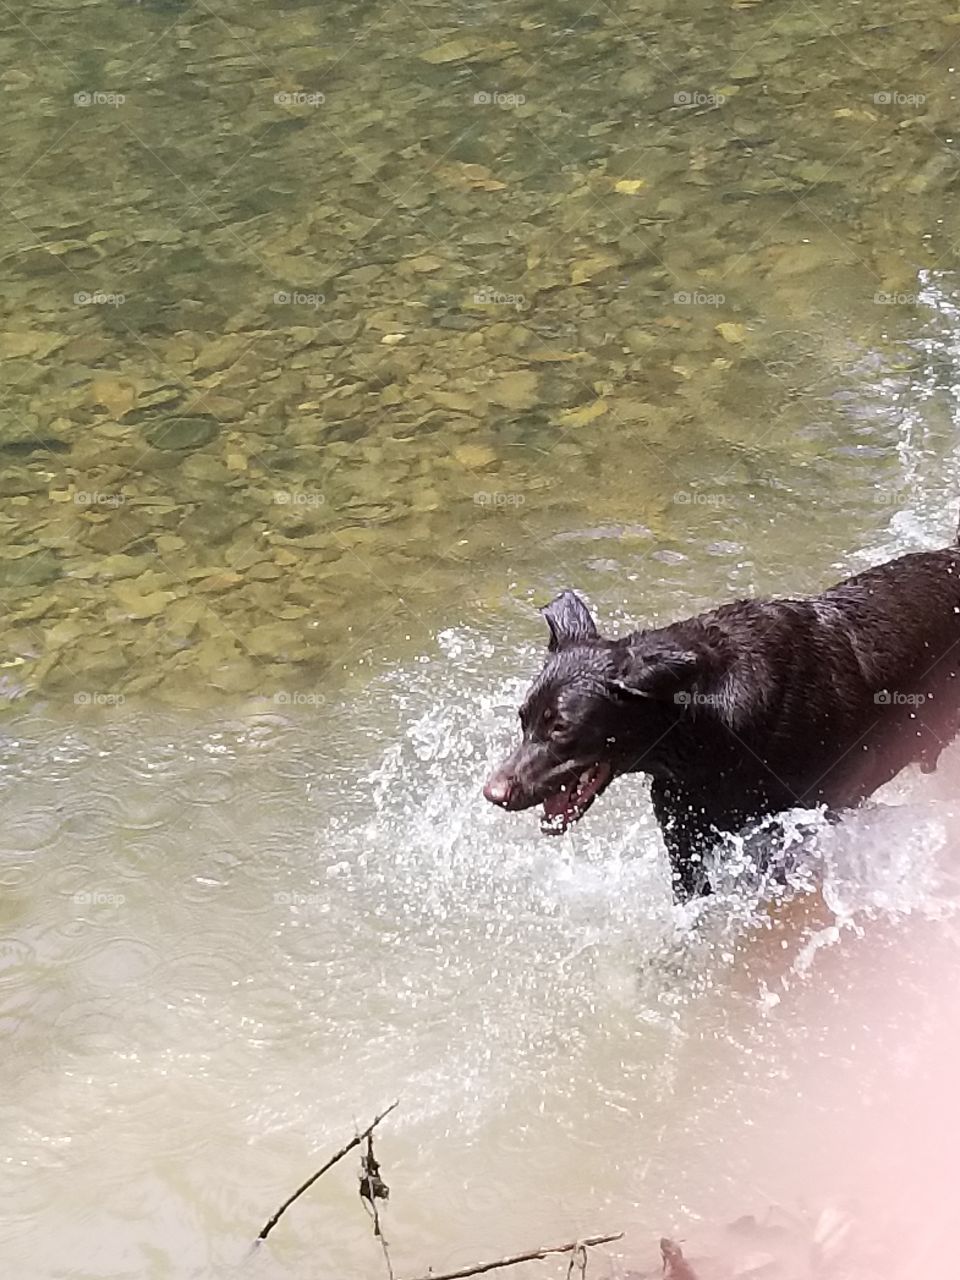 loving the water!